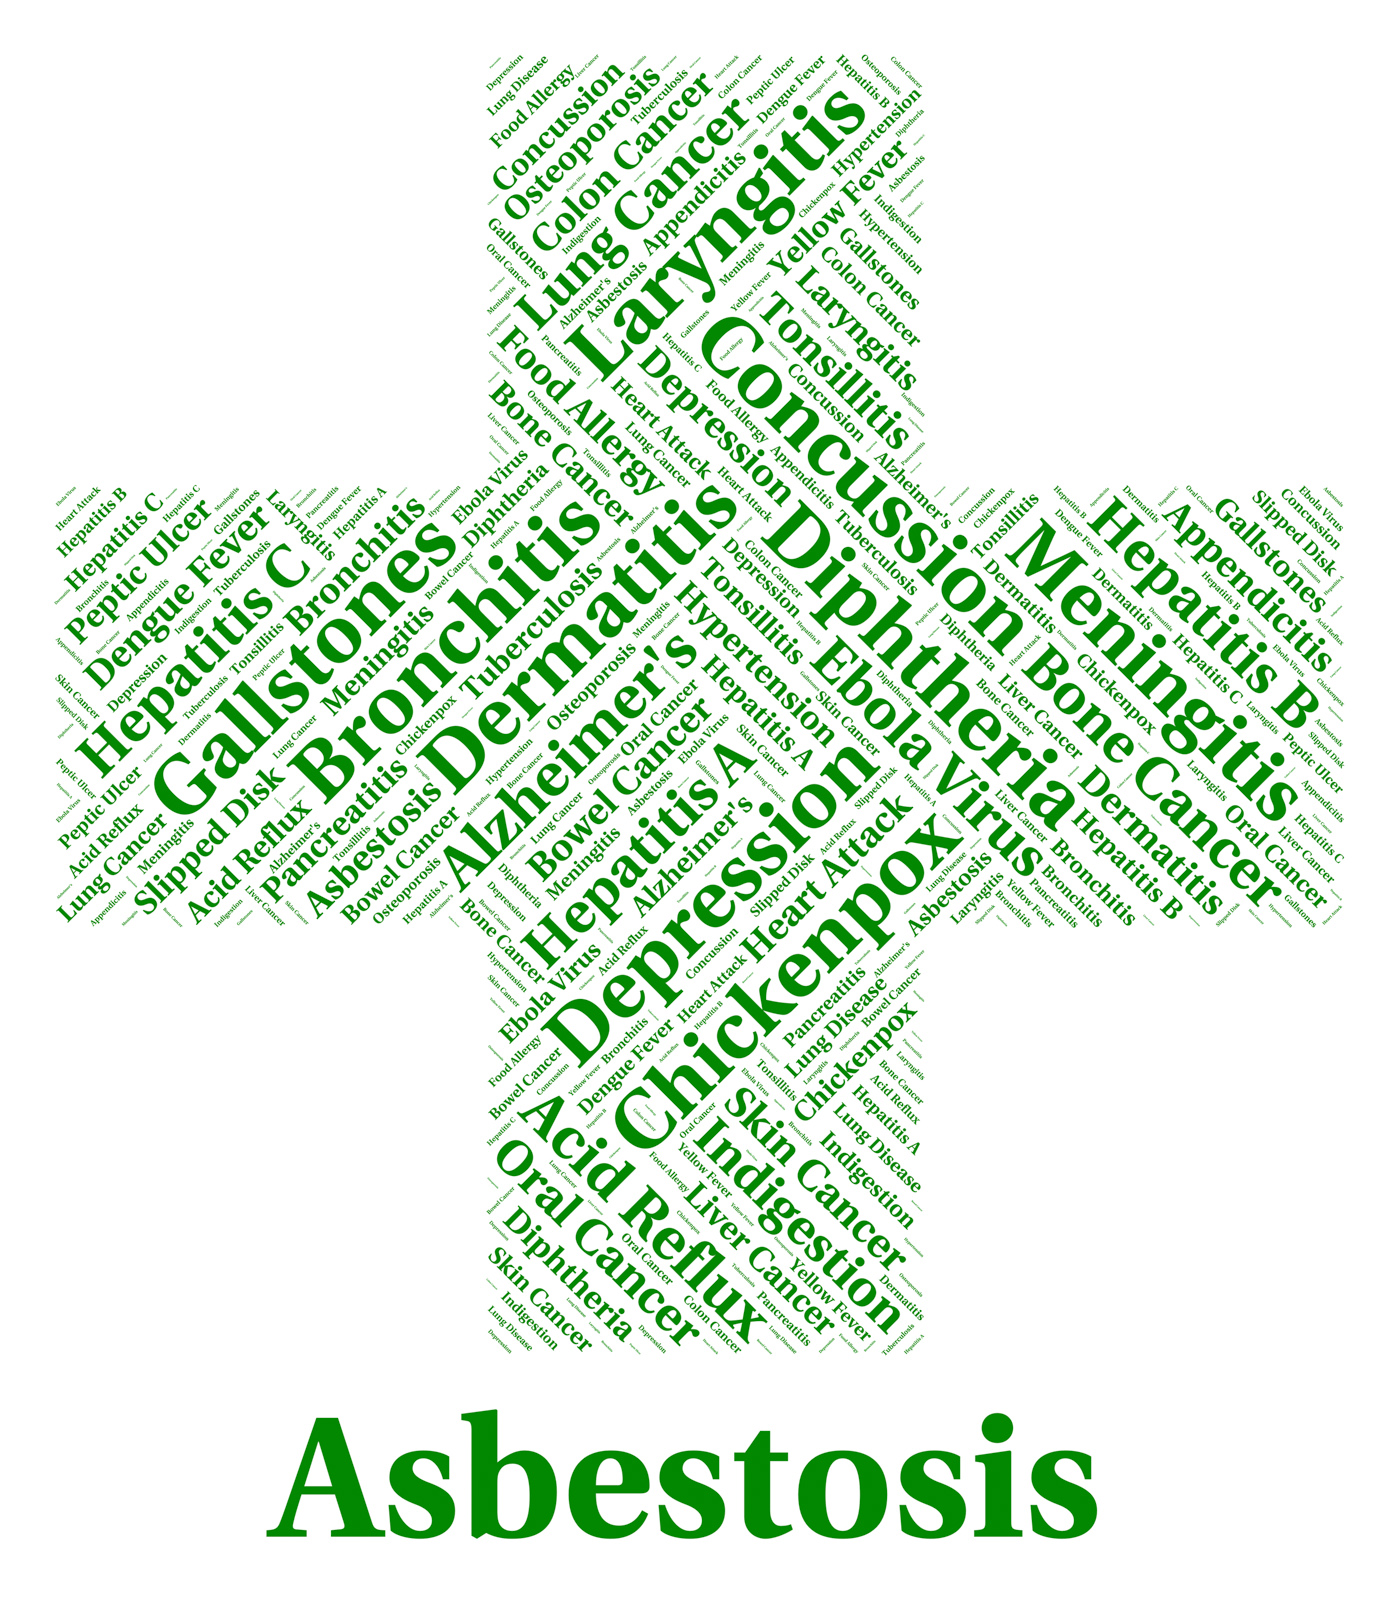 Asbestosis illness indicates lung cancer and ailments photo